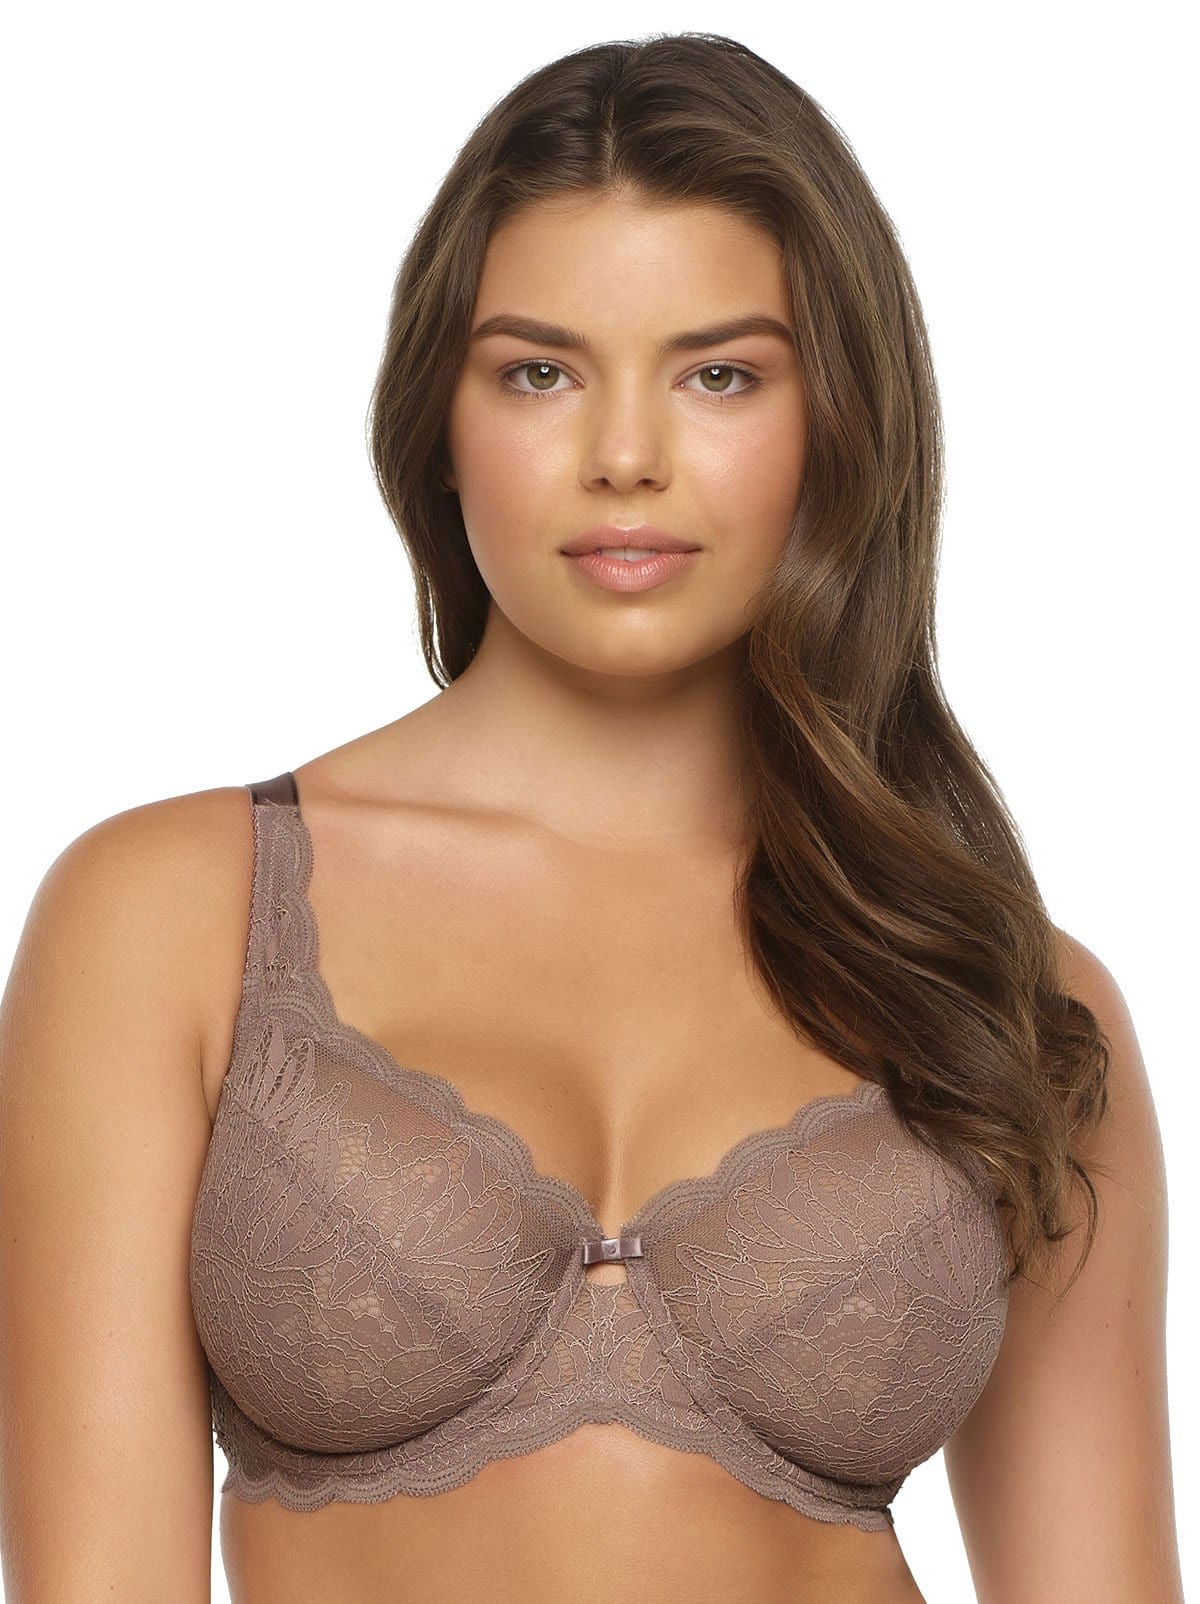 Paramour bra womens 38DDD beige padded underwired lace trim - Helia Beer Co